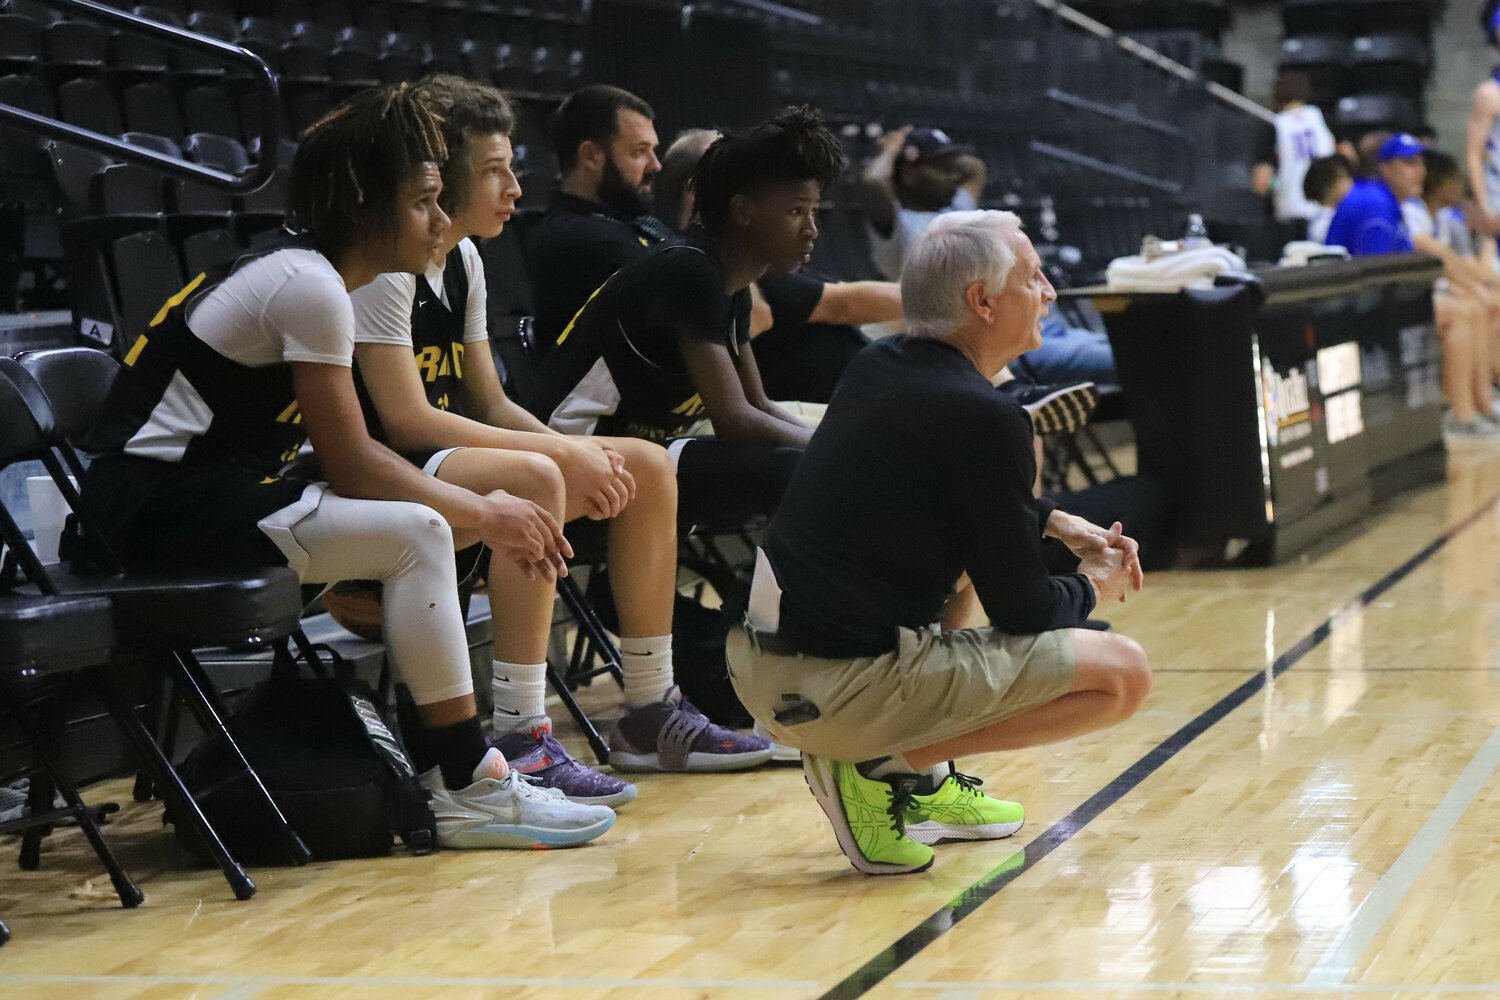 Longtime Irmo head coach Tim Whipple hopes to lead his team to a second-straight championship this season.